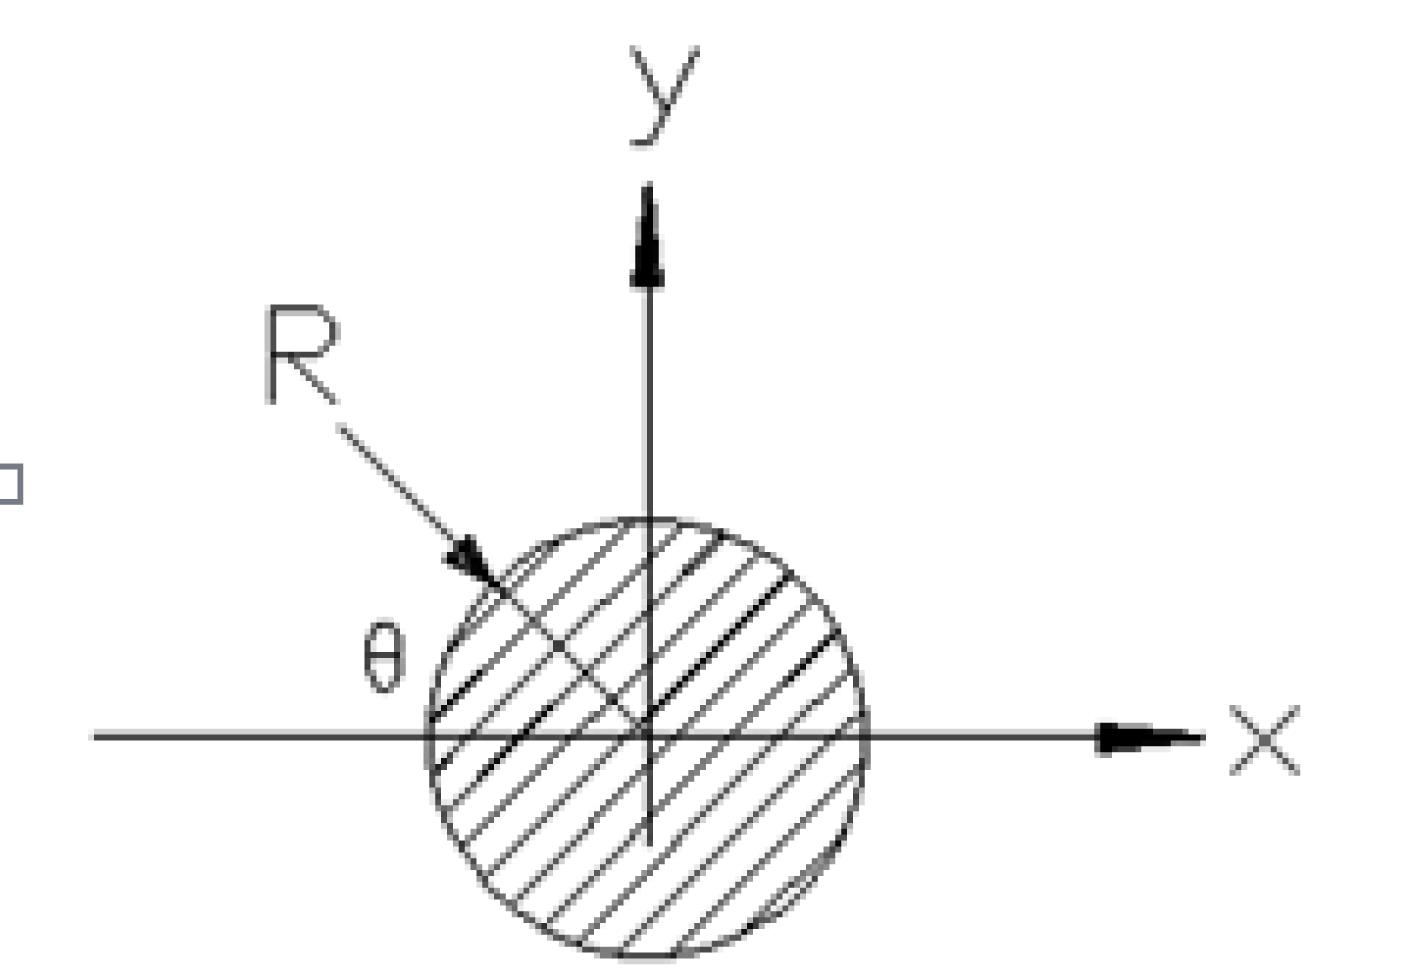 Interaction force between the gas and a spherical particle.